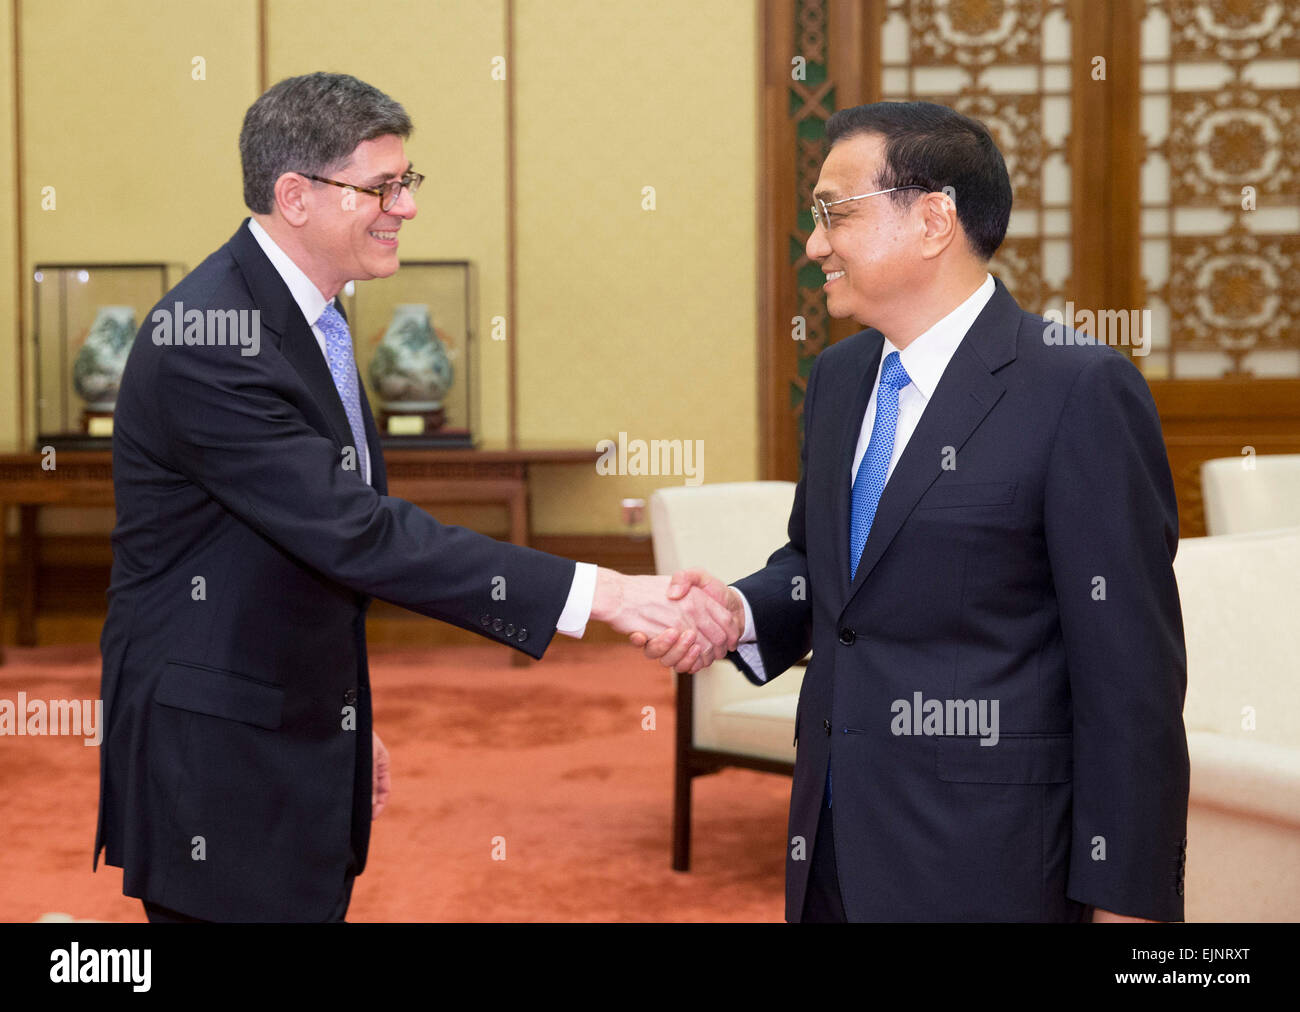 Beijing, China. 30th Mar, 2015. Chinese Premier Li Keqiang (R) meets with Treasury Secretary of the United States Jacob Lew in Beijing, capital of China, March 30, 2015. © Huang Jingwen/Xinhua/Alamy Live News Stock Photo